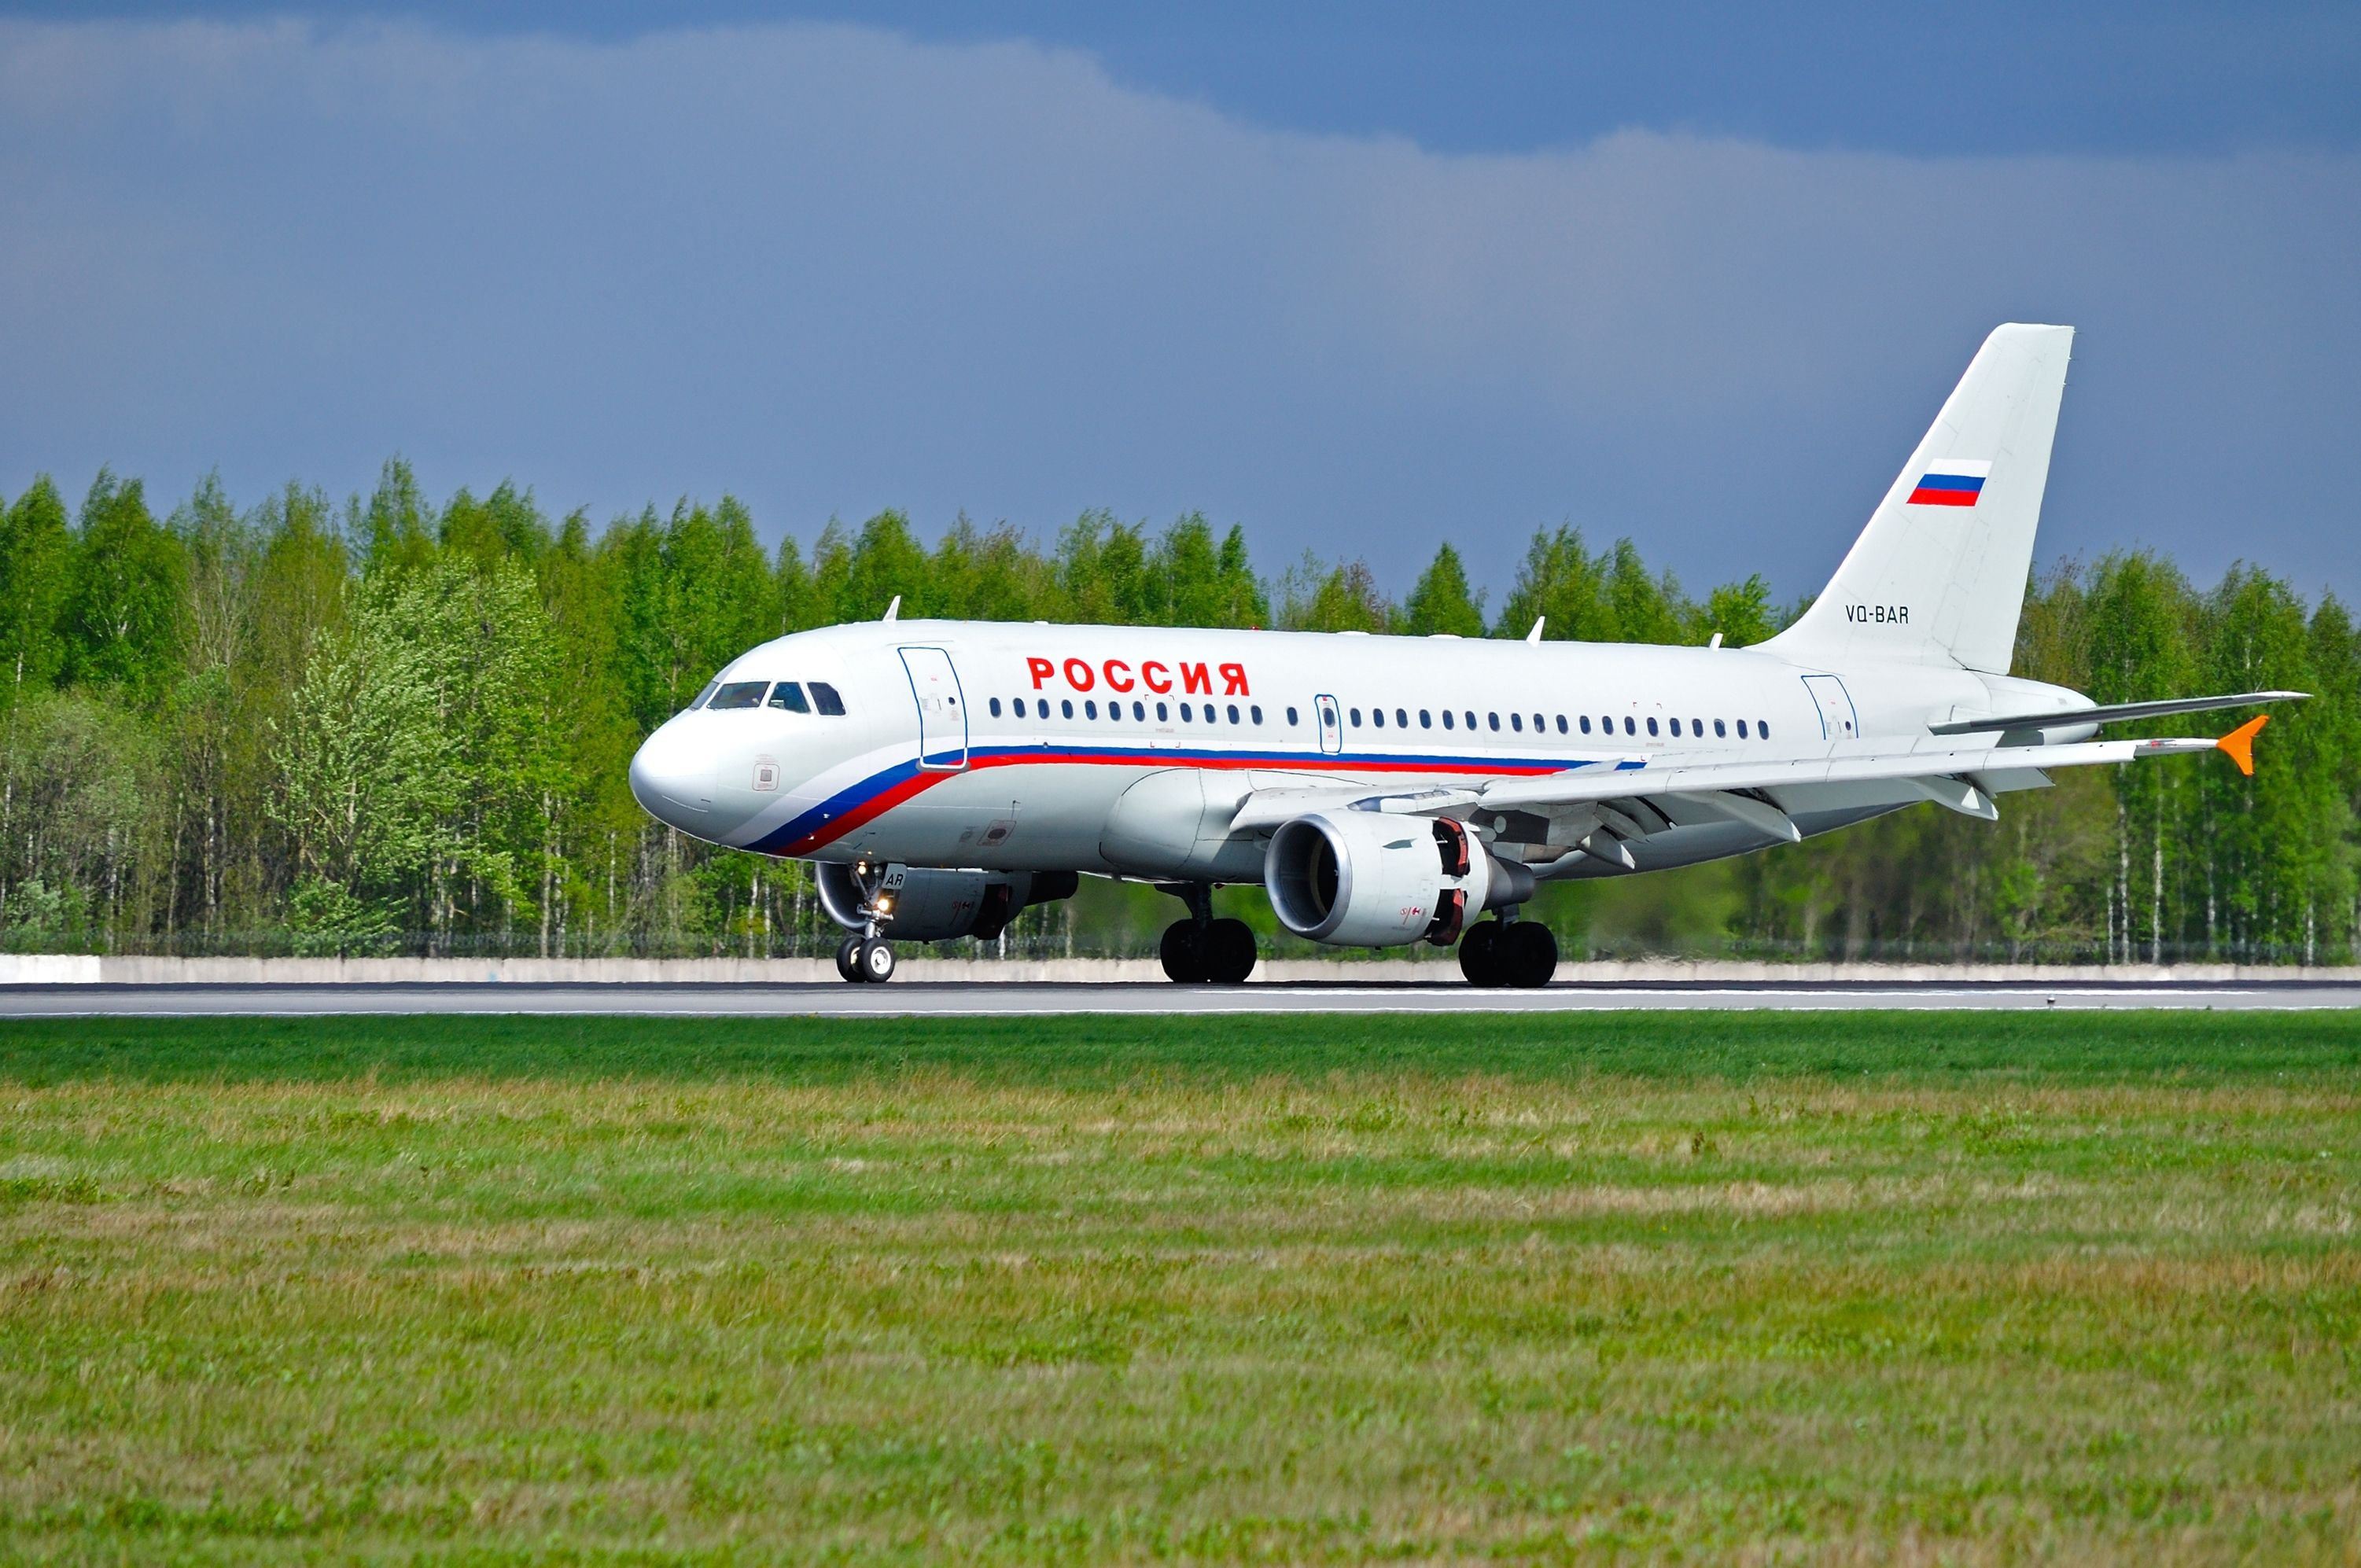 Rossiya Airlines Airbus A319